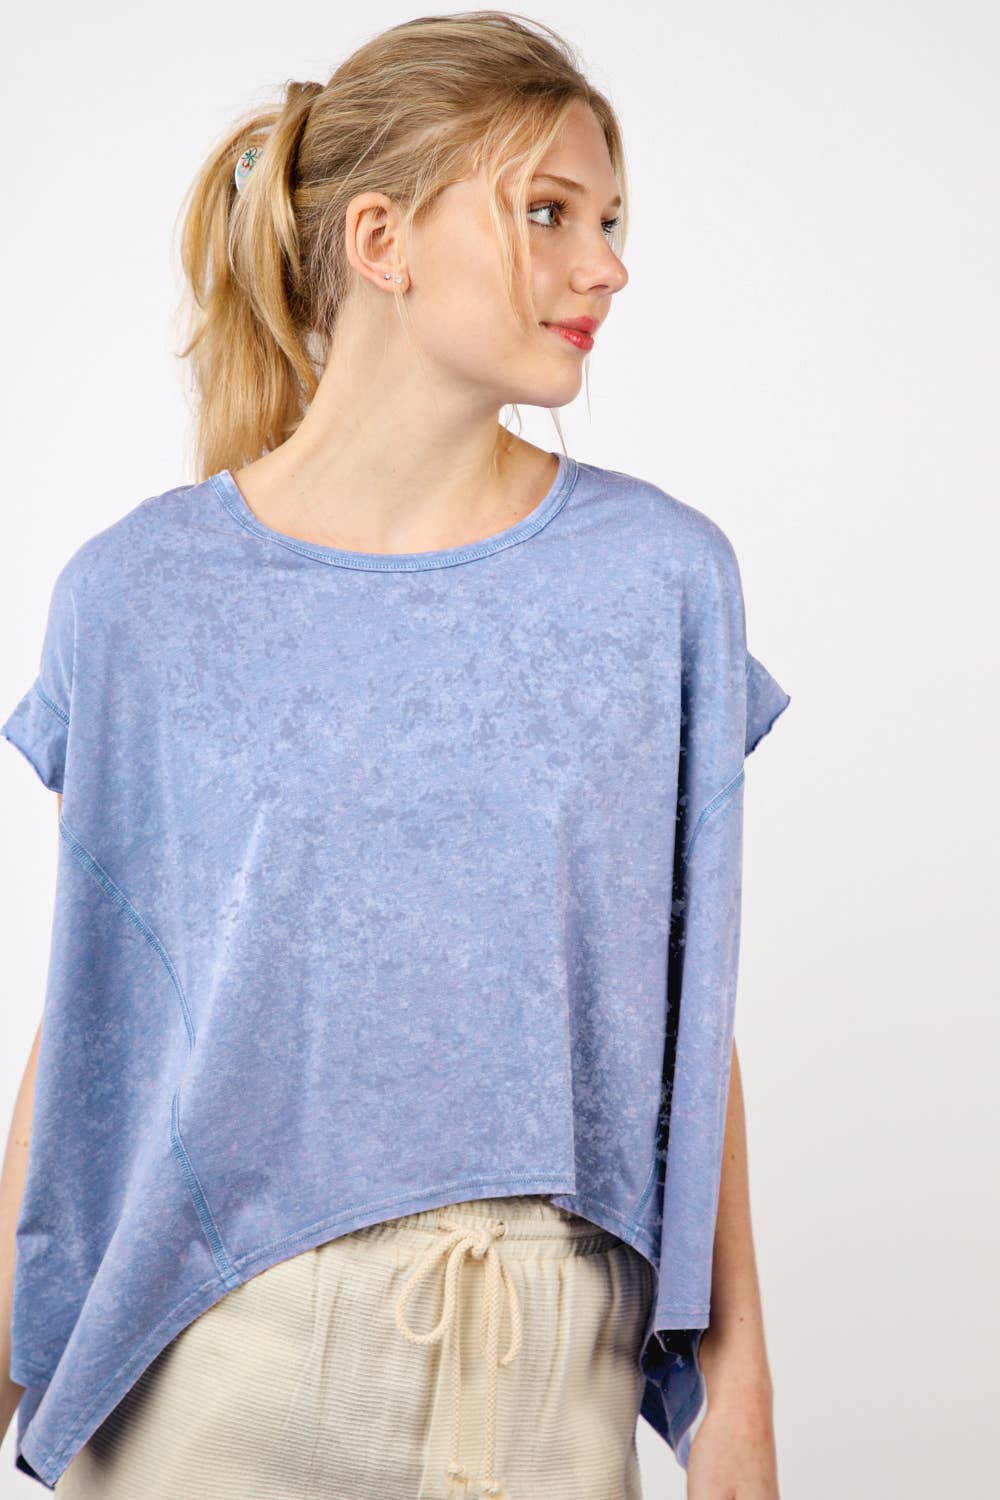 Short Sleeve Washed Comfy Knit Top